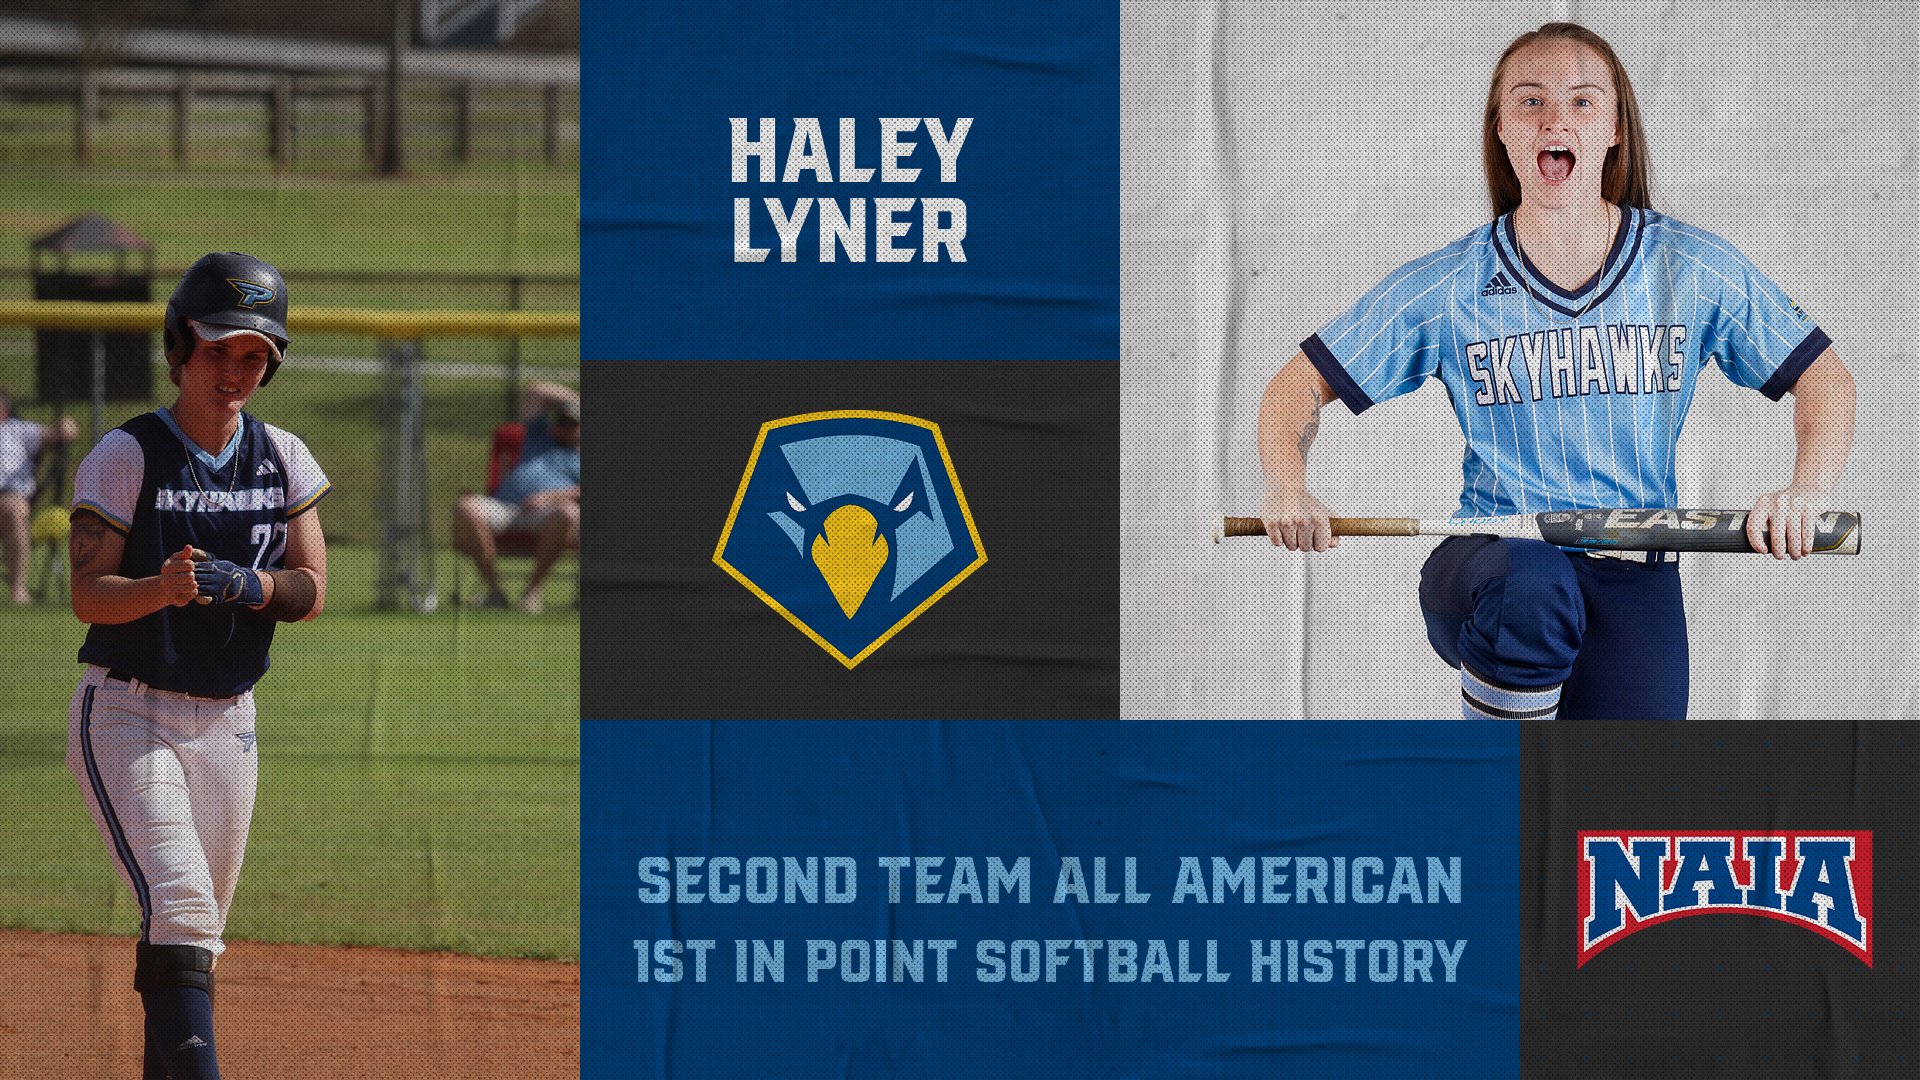 Haley Lyner named as a Second Team All-American to finish her illustrious career.